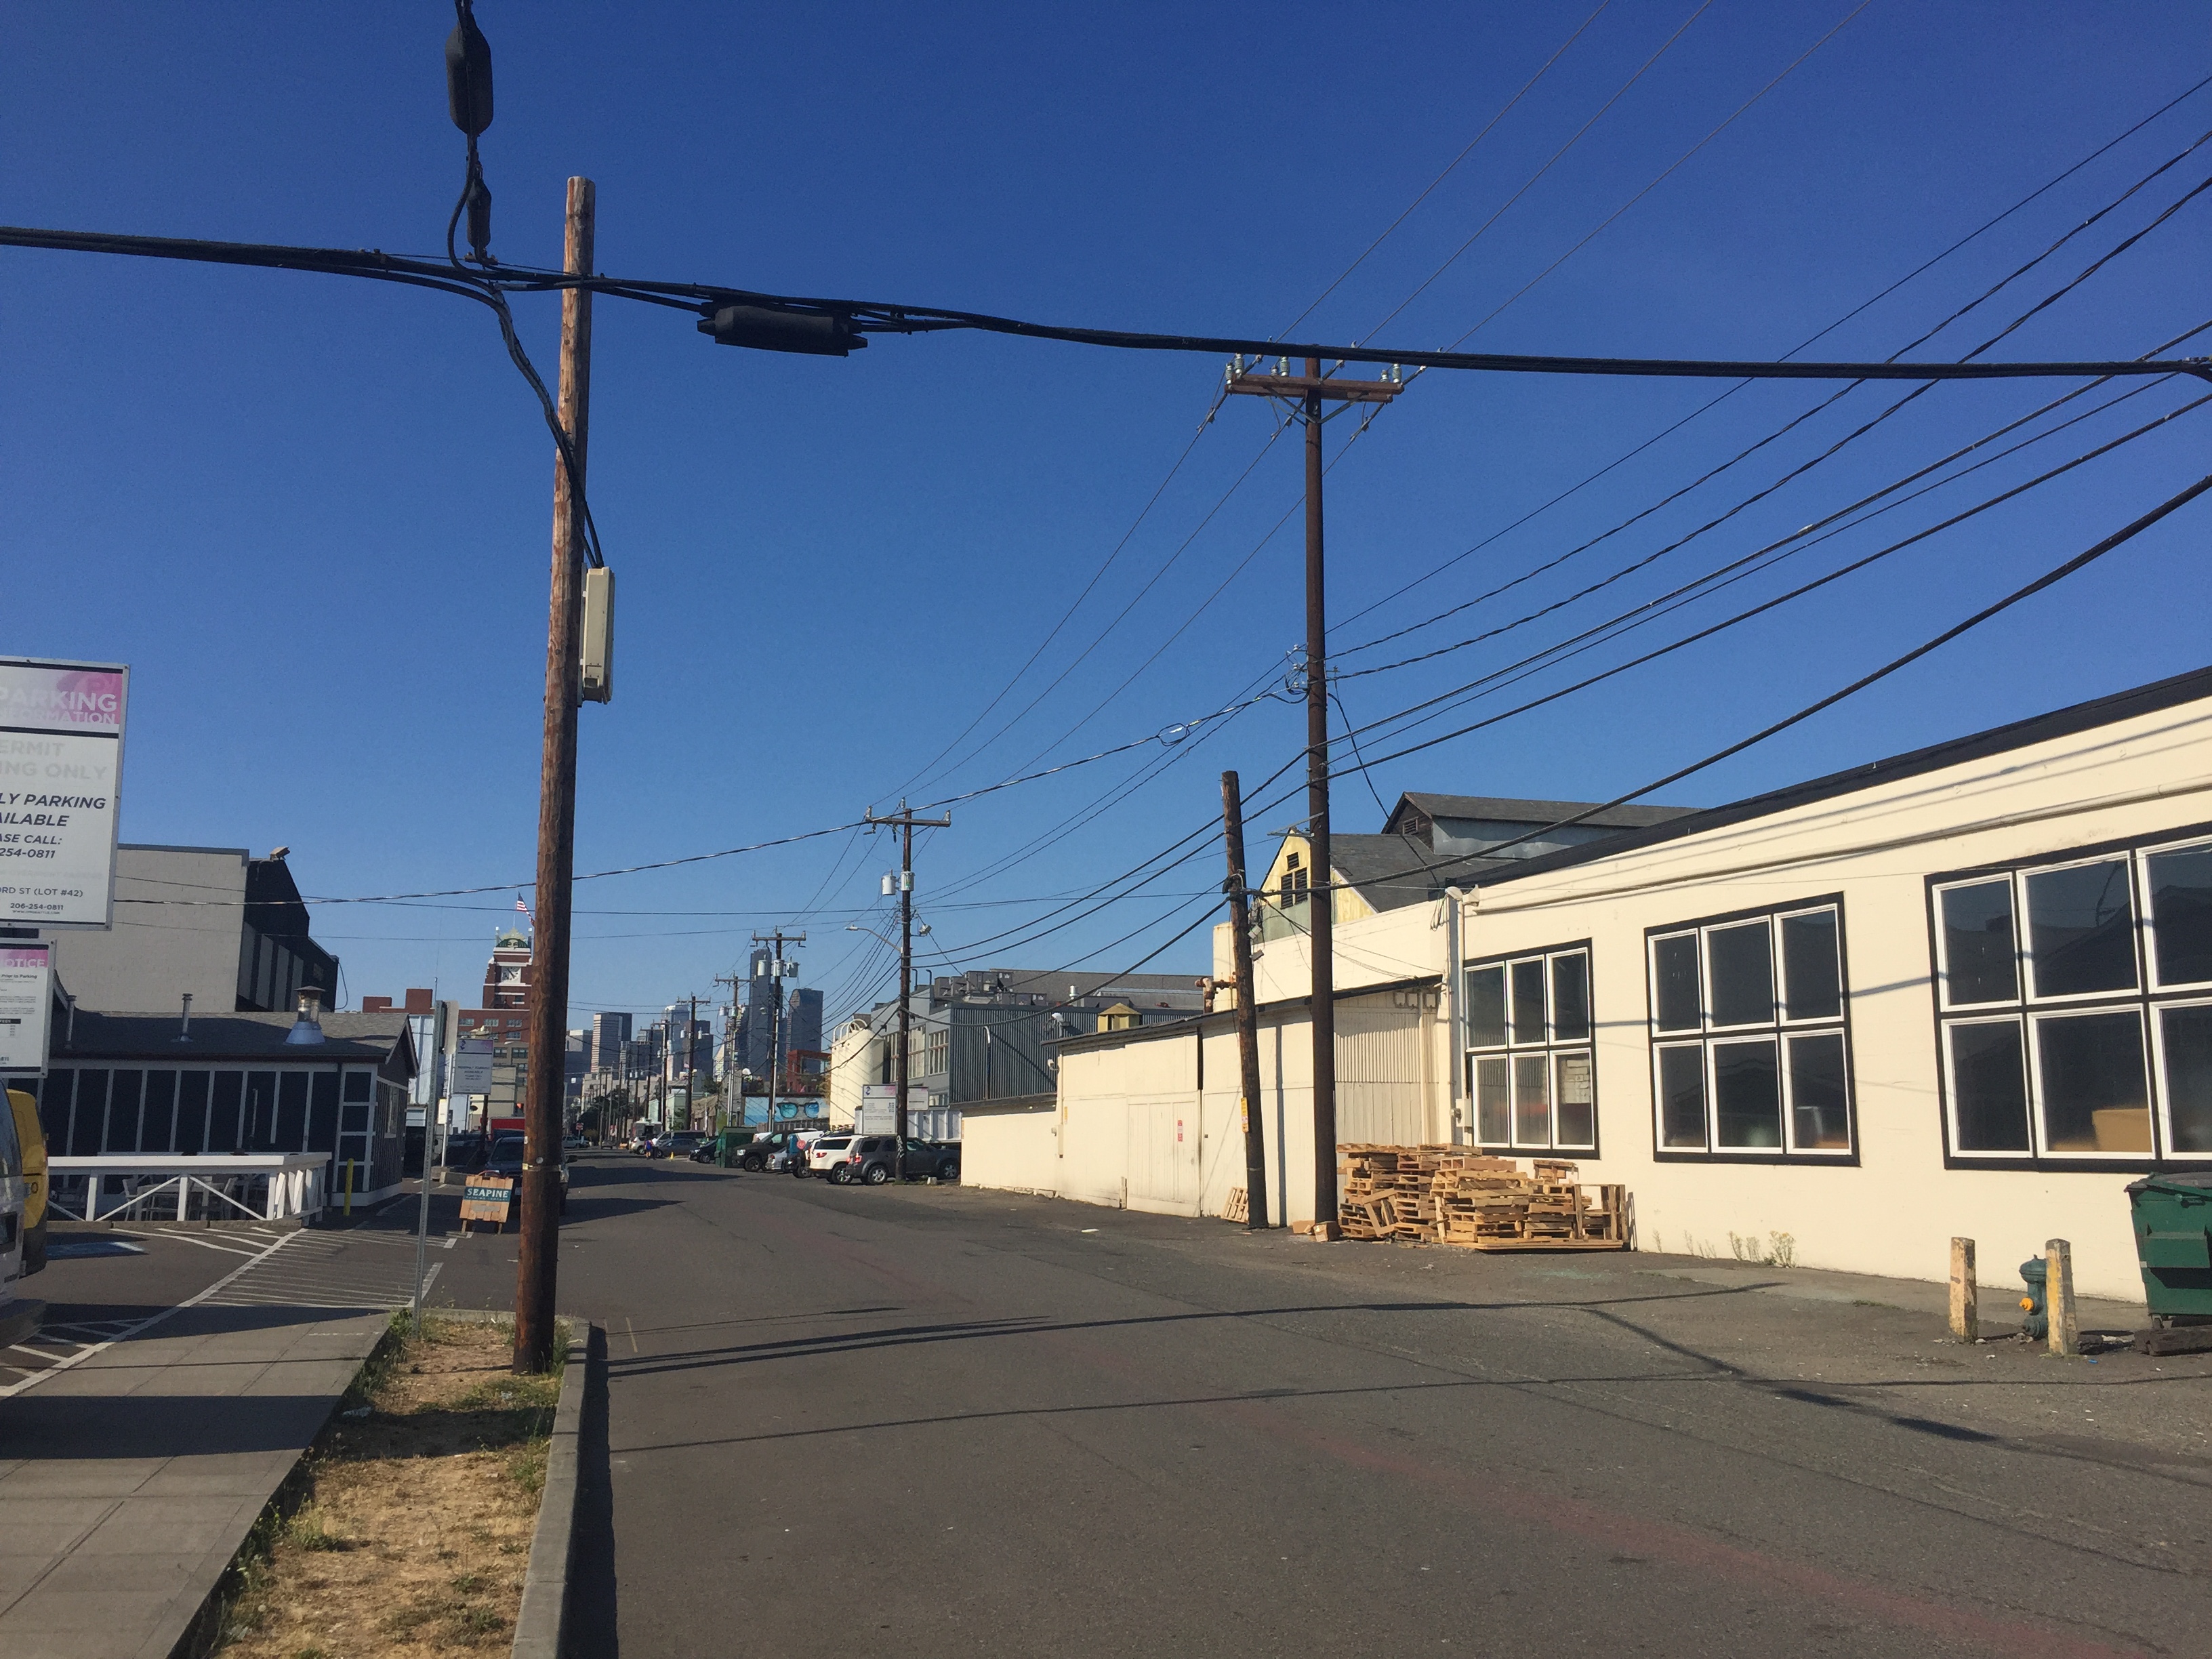 Looking north from the Duwamish Industrial Area.